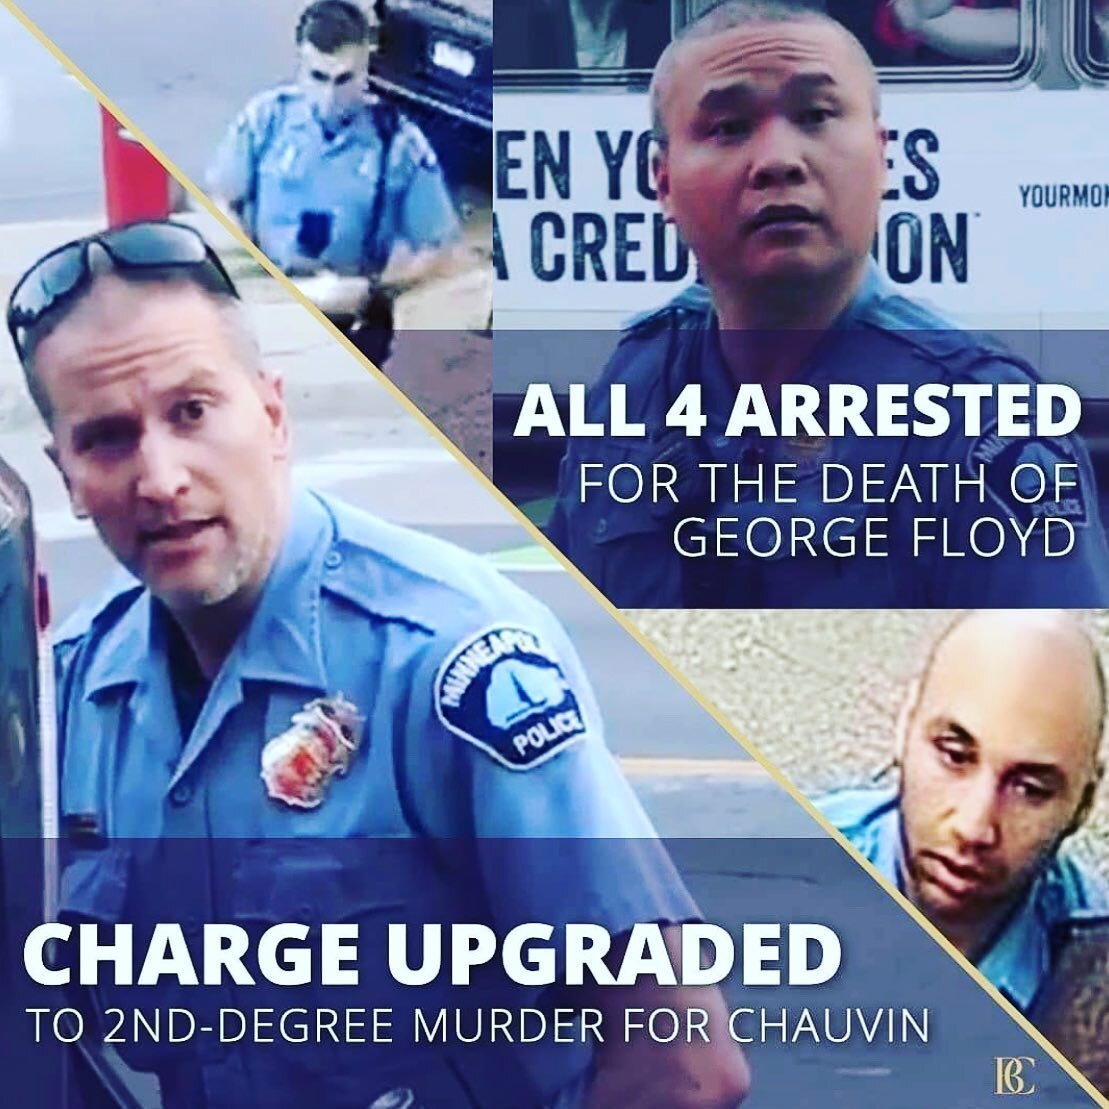 Minnesota Attorney General Keith Ellison is increasing charges against Derek Chauvin to 2nd degree in George Floyd&rsquo;s murder and also charging other 3 officers. This is another important step for justice,&quot;